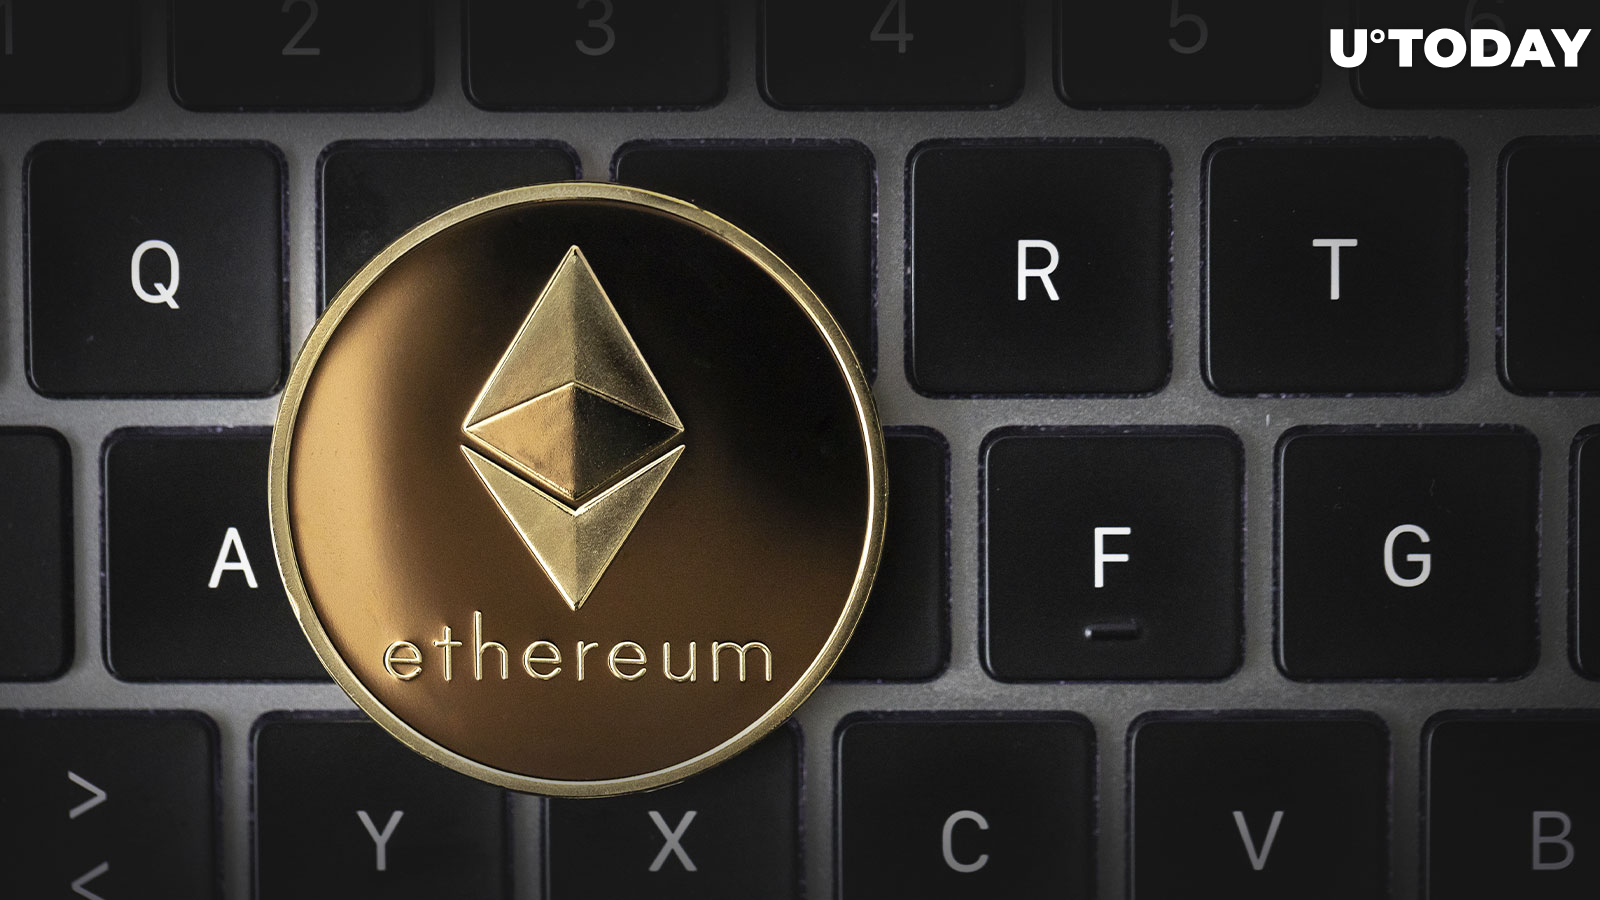 Ethereum (ETH) Sees High Volatility as U.S. Records Higher-Than-Expected GDP Growth